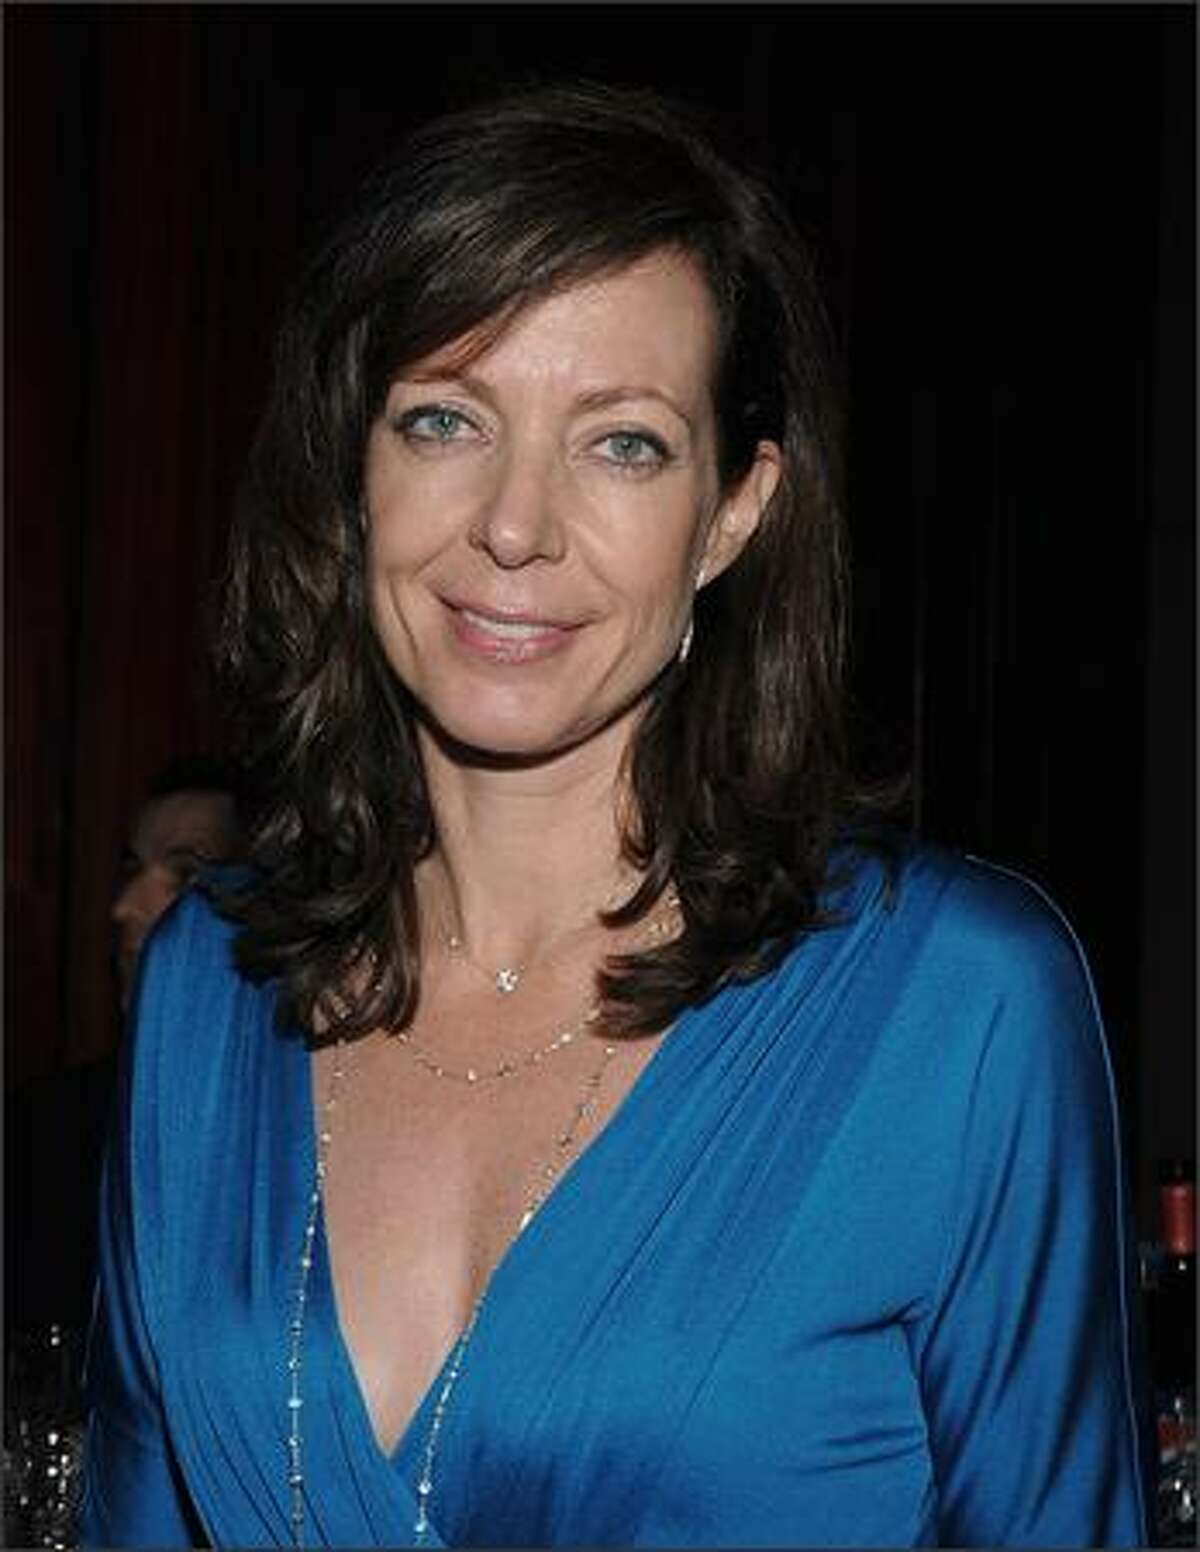 Actress Allison Janney attends the after party celebrating Paul Newman's Hole in the Wall Camps at Alice Tully Hall in New York City.